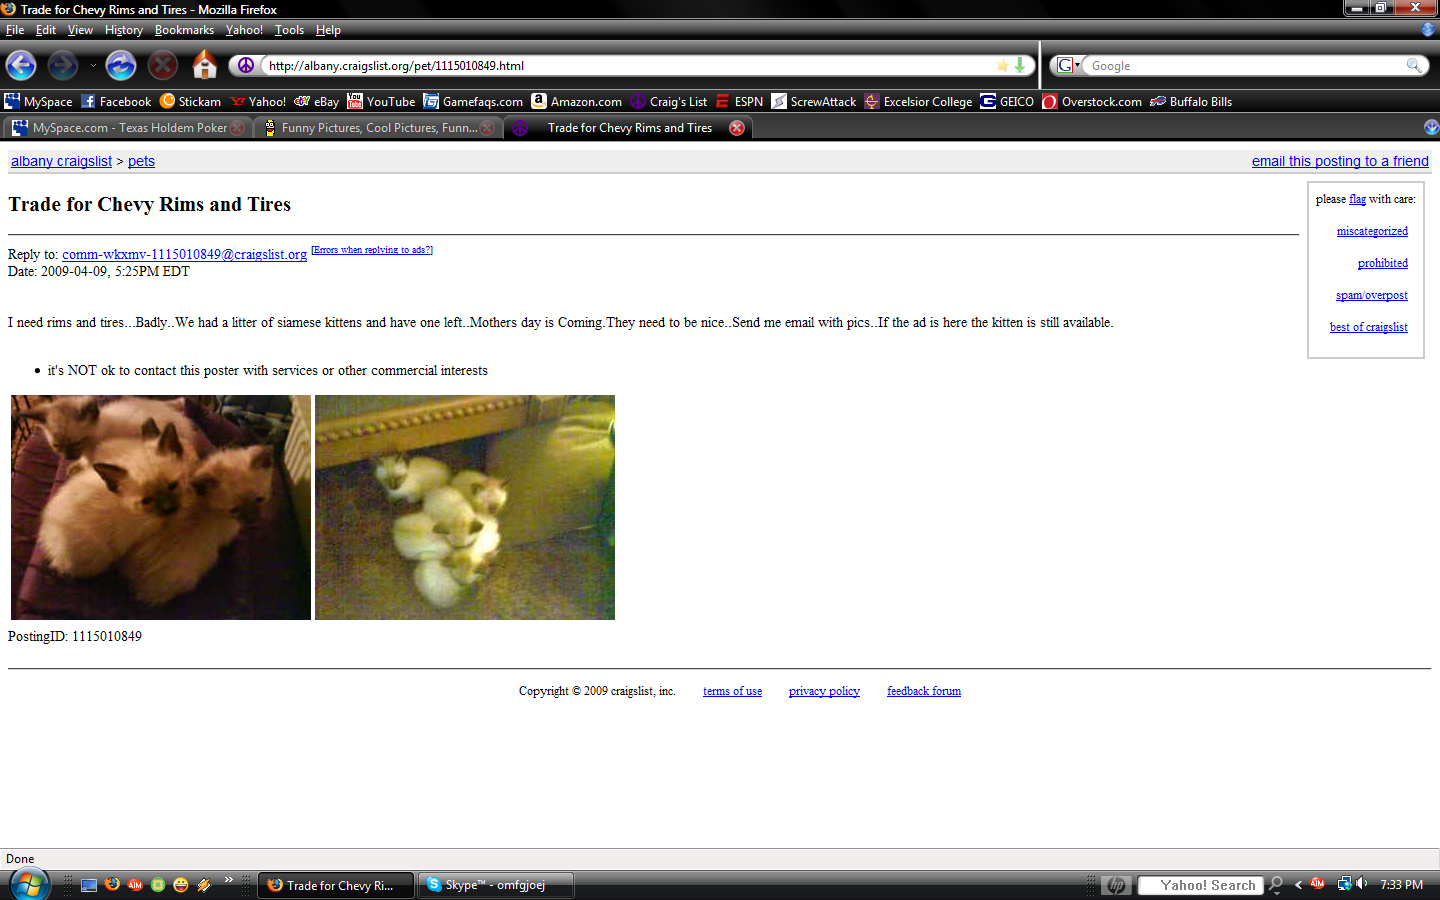 Really? Seriously? Kittens for rims?